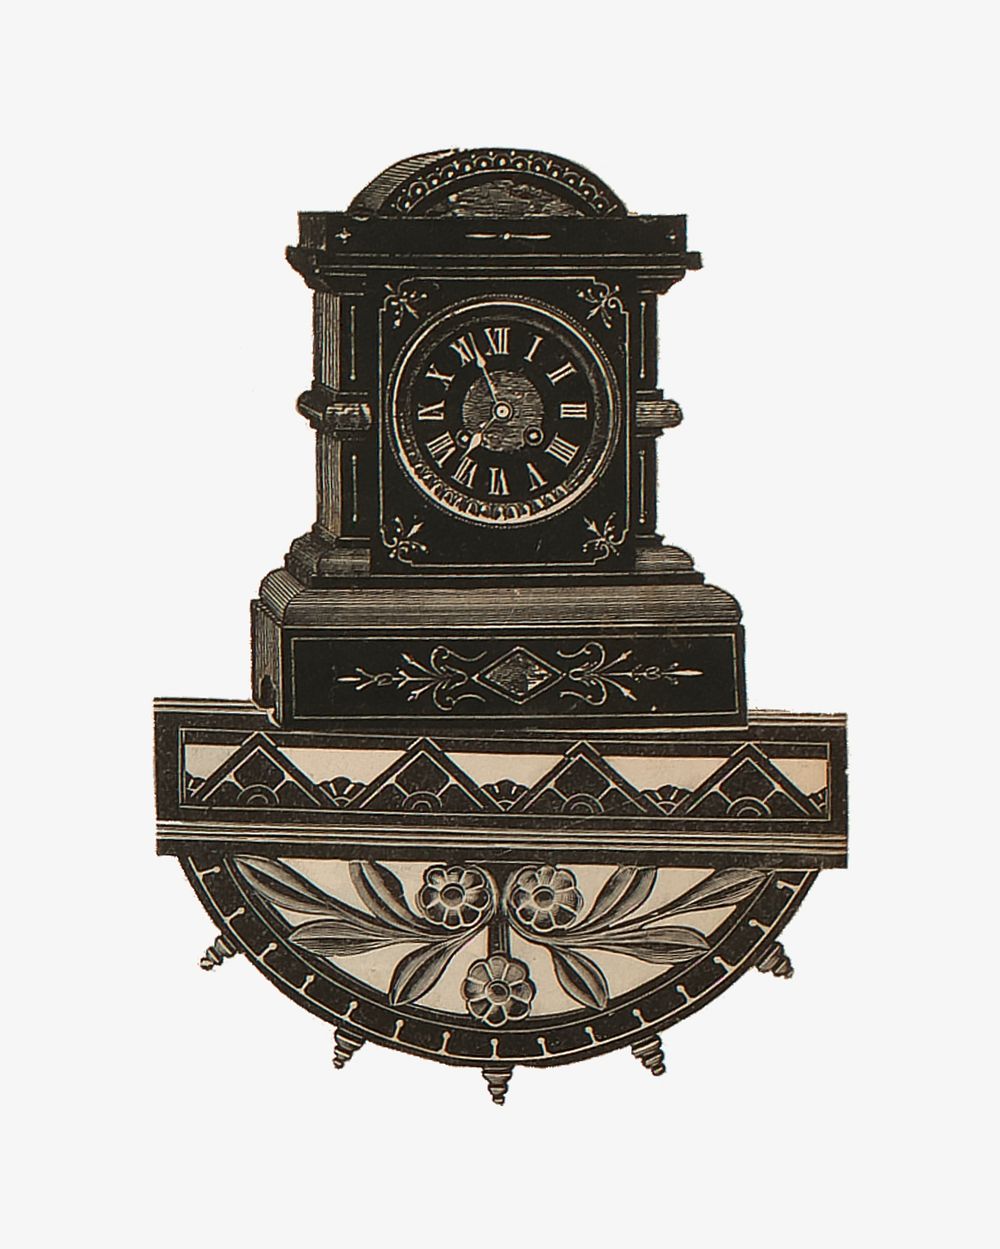 Victorian wall clock, antique object illustration.  Remastered by rawpixel.